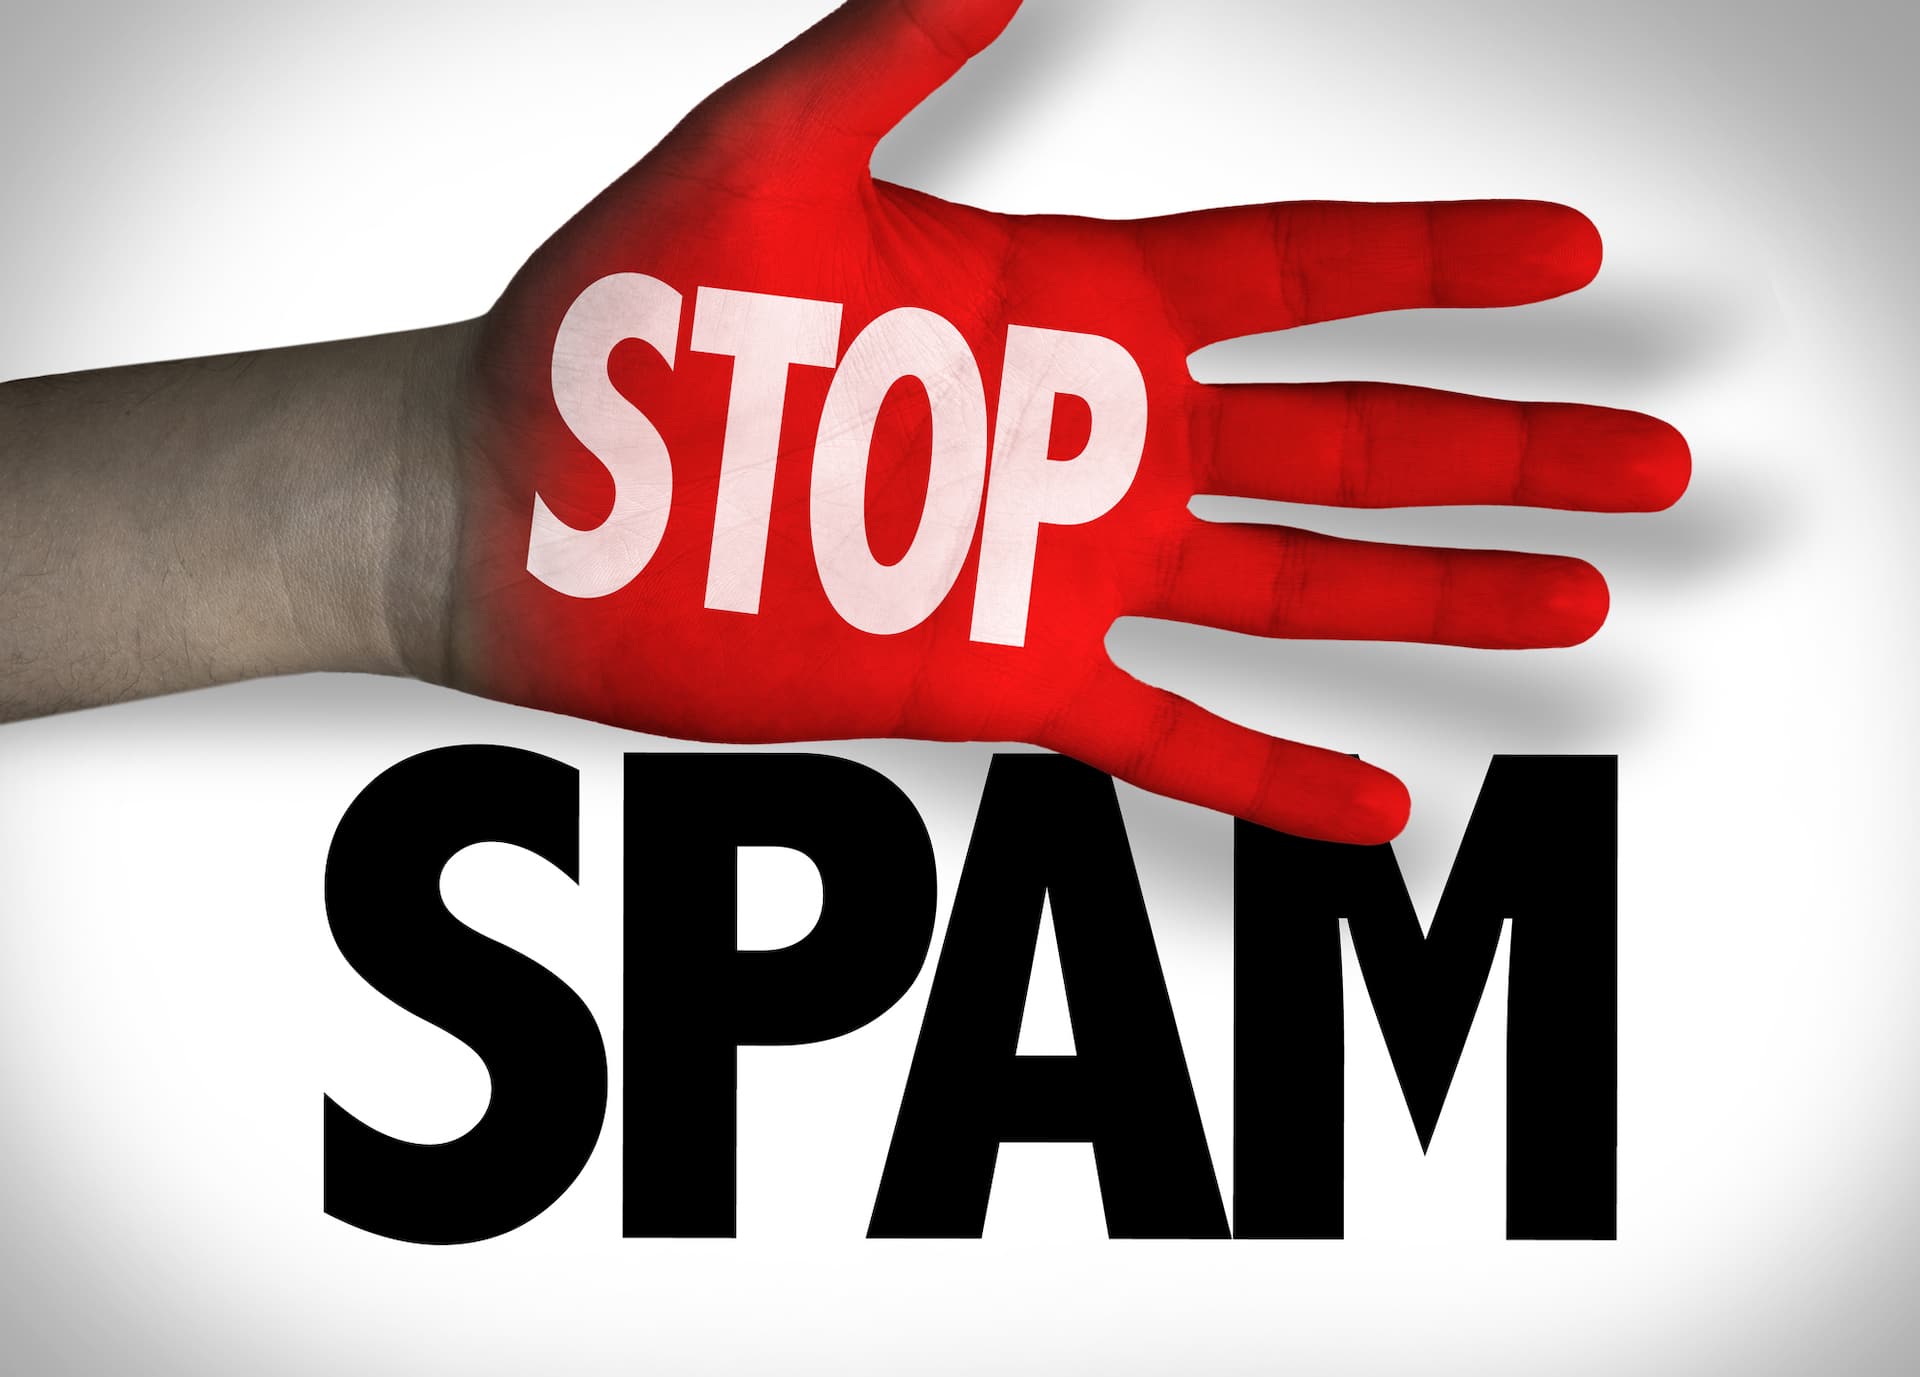 CAN-SPAM Act Laws and Requirements